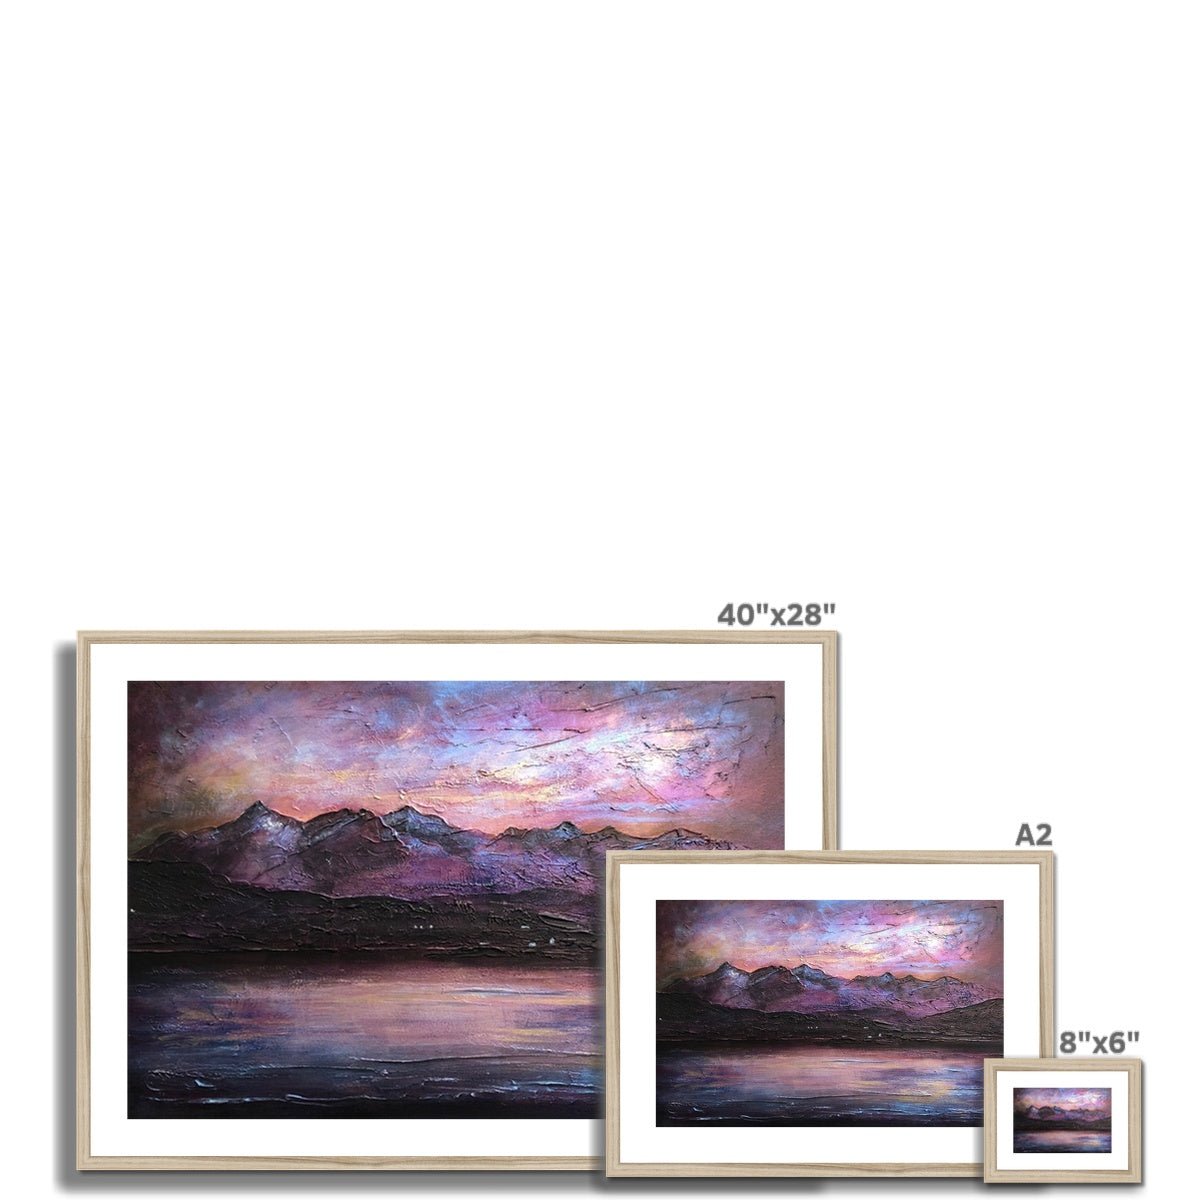 Last Skye Light Painting | Framed & Mounted Prints From Scotland-Framed & Mounted Prints-Skye Art Gallery-Paintings, Prints, Homeware, Art Gifts From Scotland By Scottish Artist Kevin Hunter